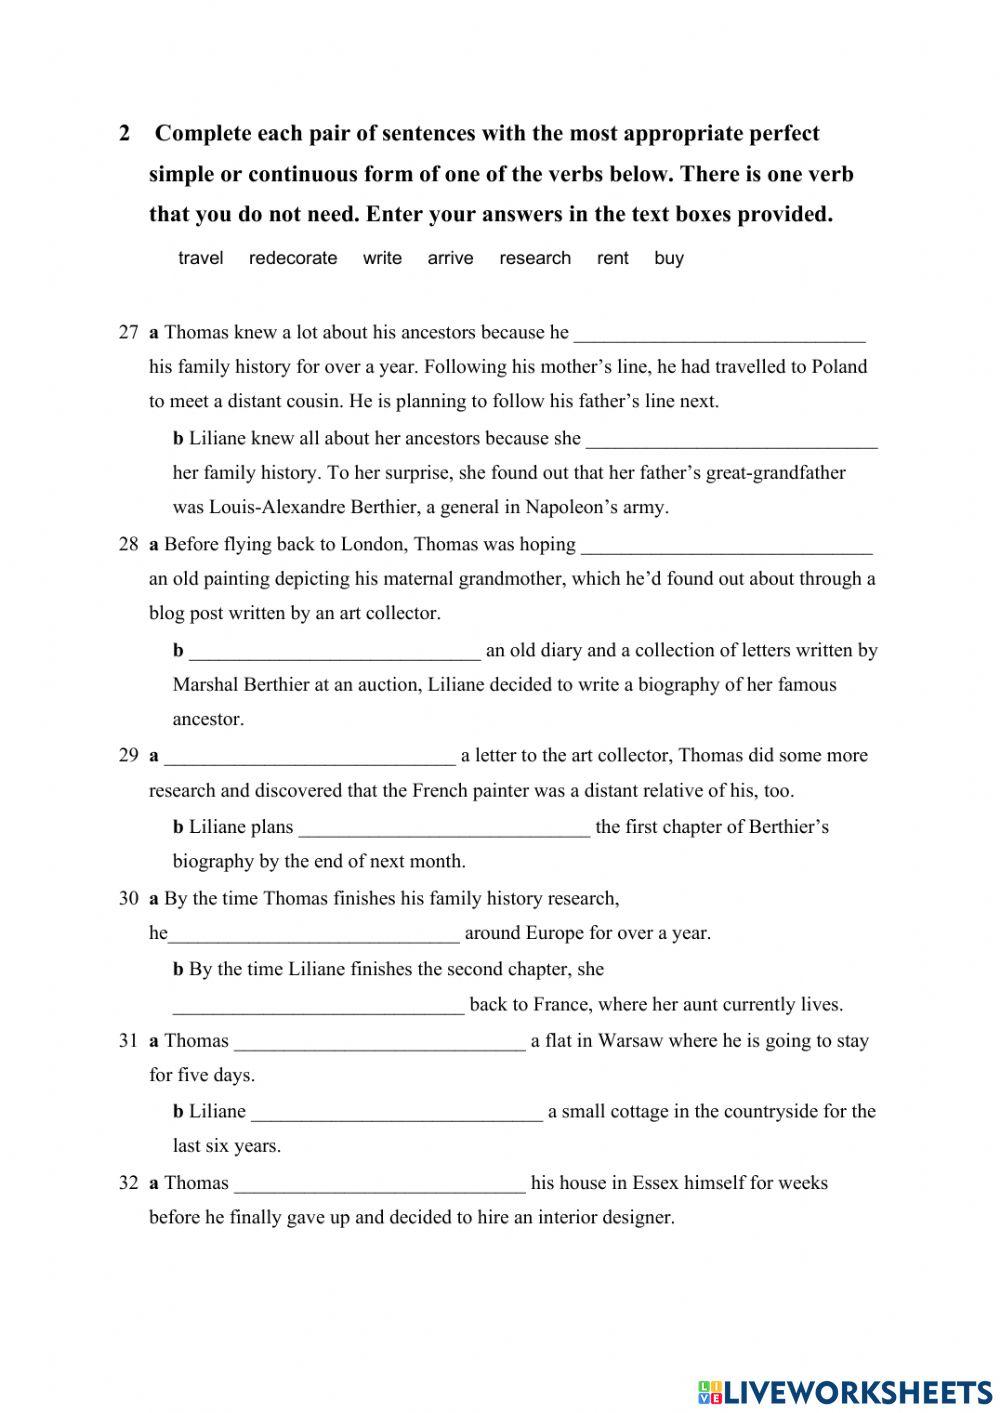 the-perfect-aspect-of-the-verb-worksheet-live-worksheets